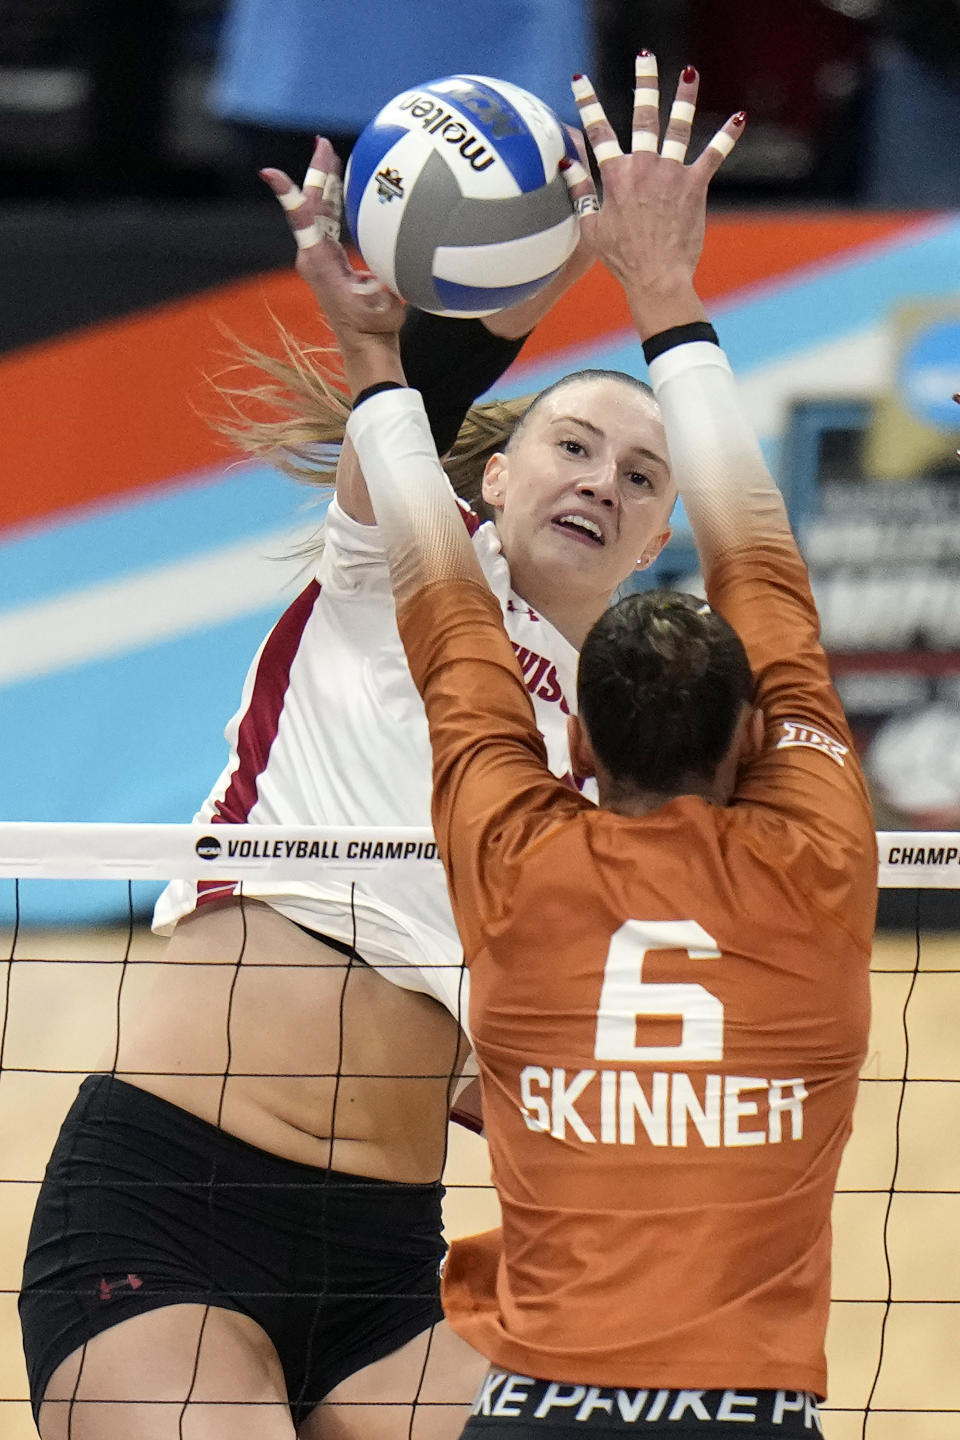 Wisconsin's Anna Smrek (14) scores past Texas's Madisen Skinner (6) during a semifinal match in the NCAA Division I women's college volleyball tournament Thursday, Dec. 14, 2023, in Tampa, Fla. (AP Photo/Chris O'Meara)